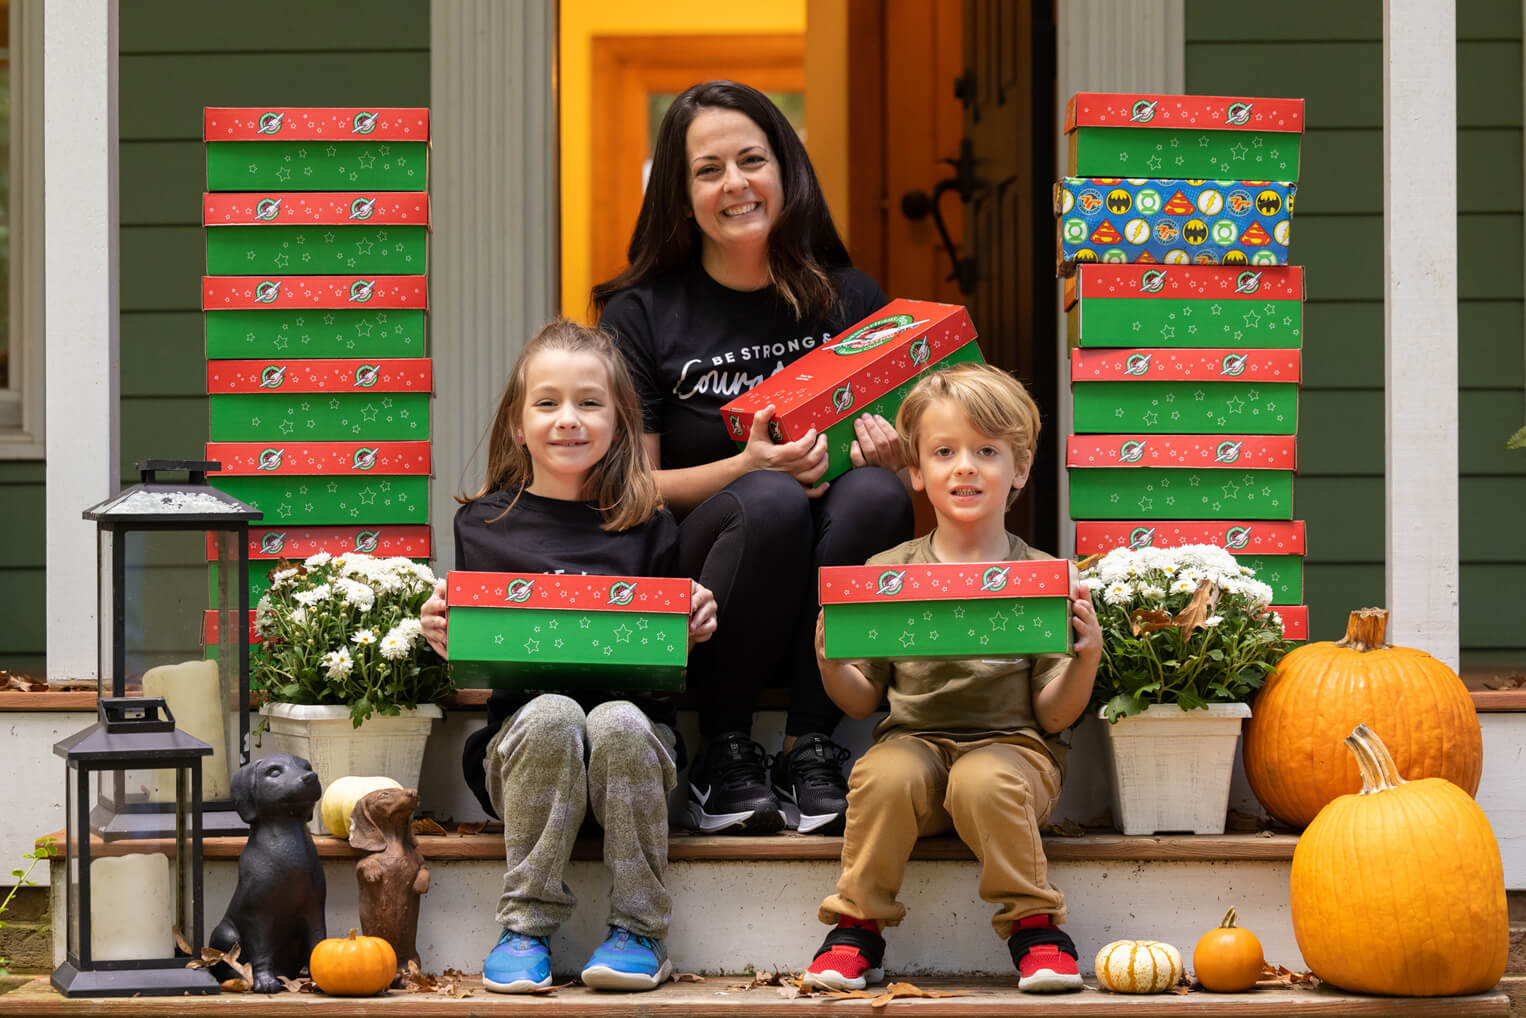 Ava Smith, left, has encouraged her family to pack shoeboxes for children in need all over the world.